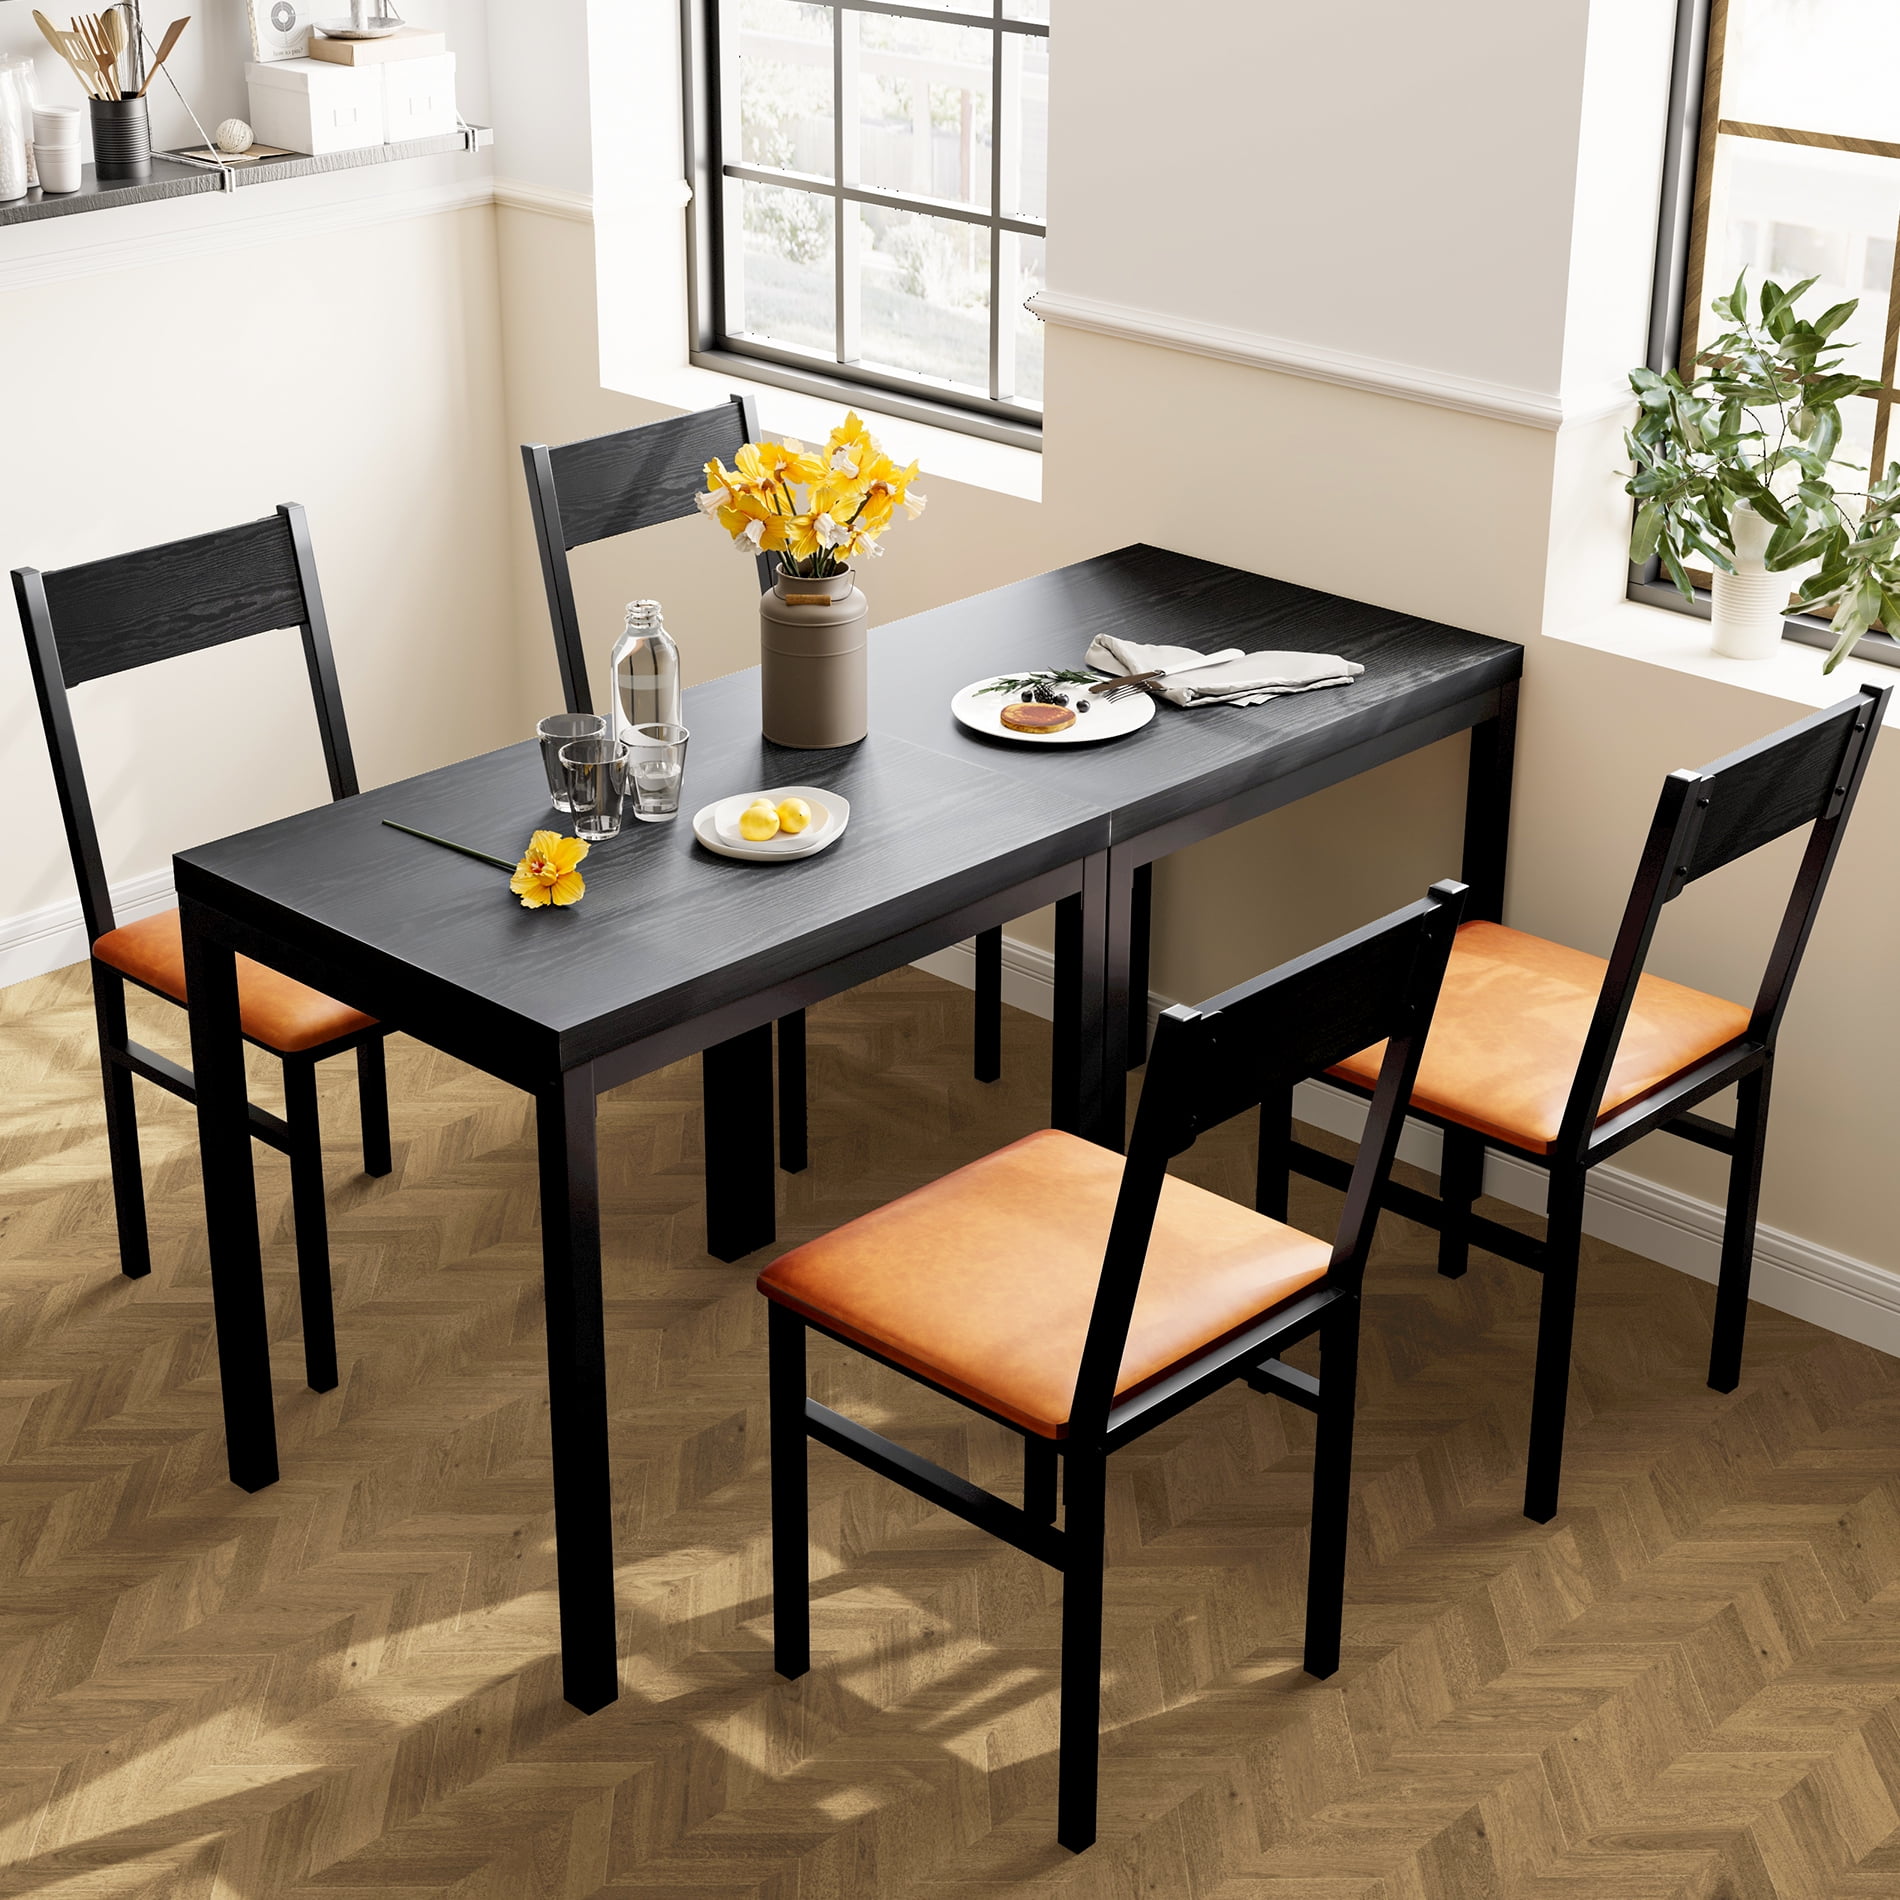 Trinity Glass Black Dining Table Set, 3-Piece Room Kitchen Table and PU Cushion Chair Small Space, Dining Set for 2